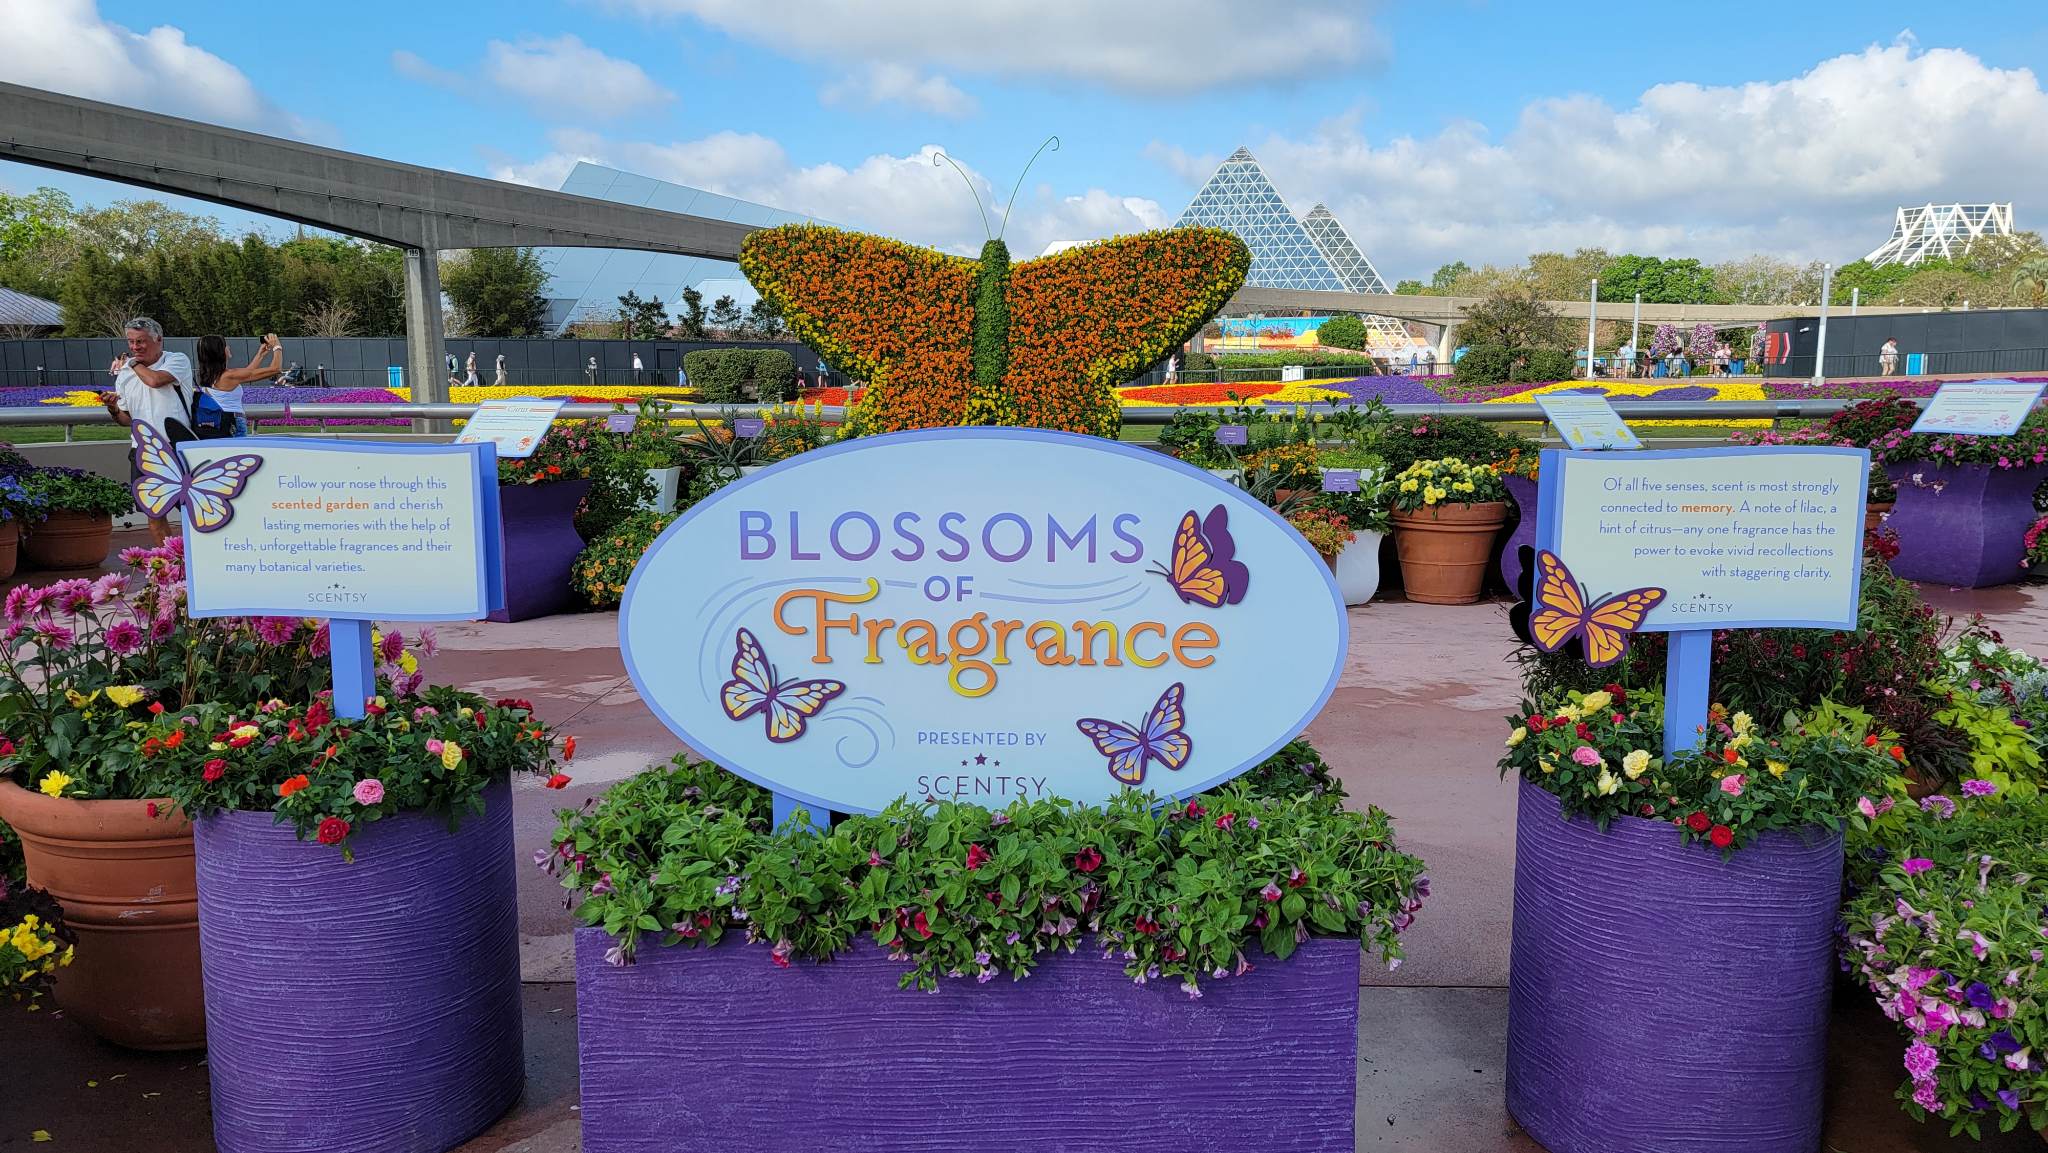 Photos: Blossoms of Fragrance from Scentsy returns to the 2023 EPCOT ...